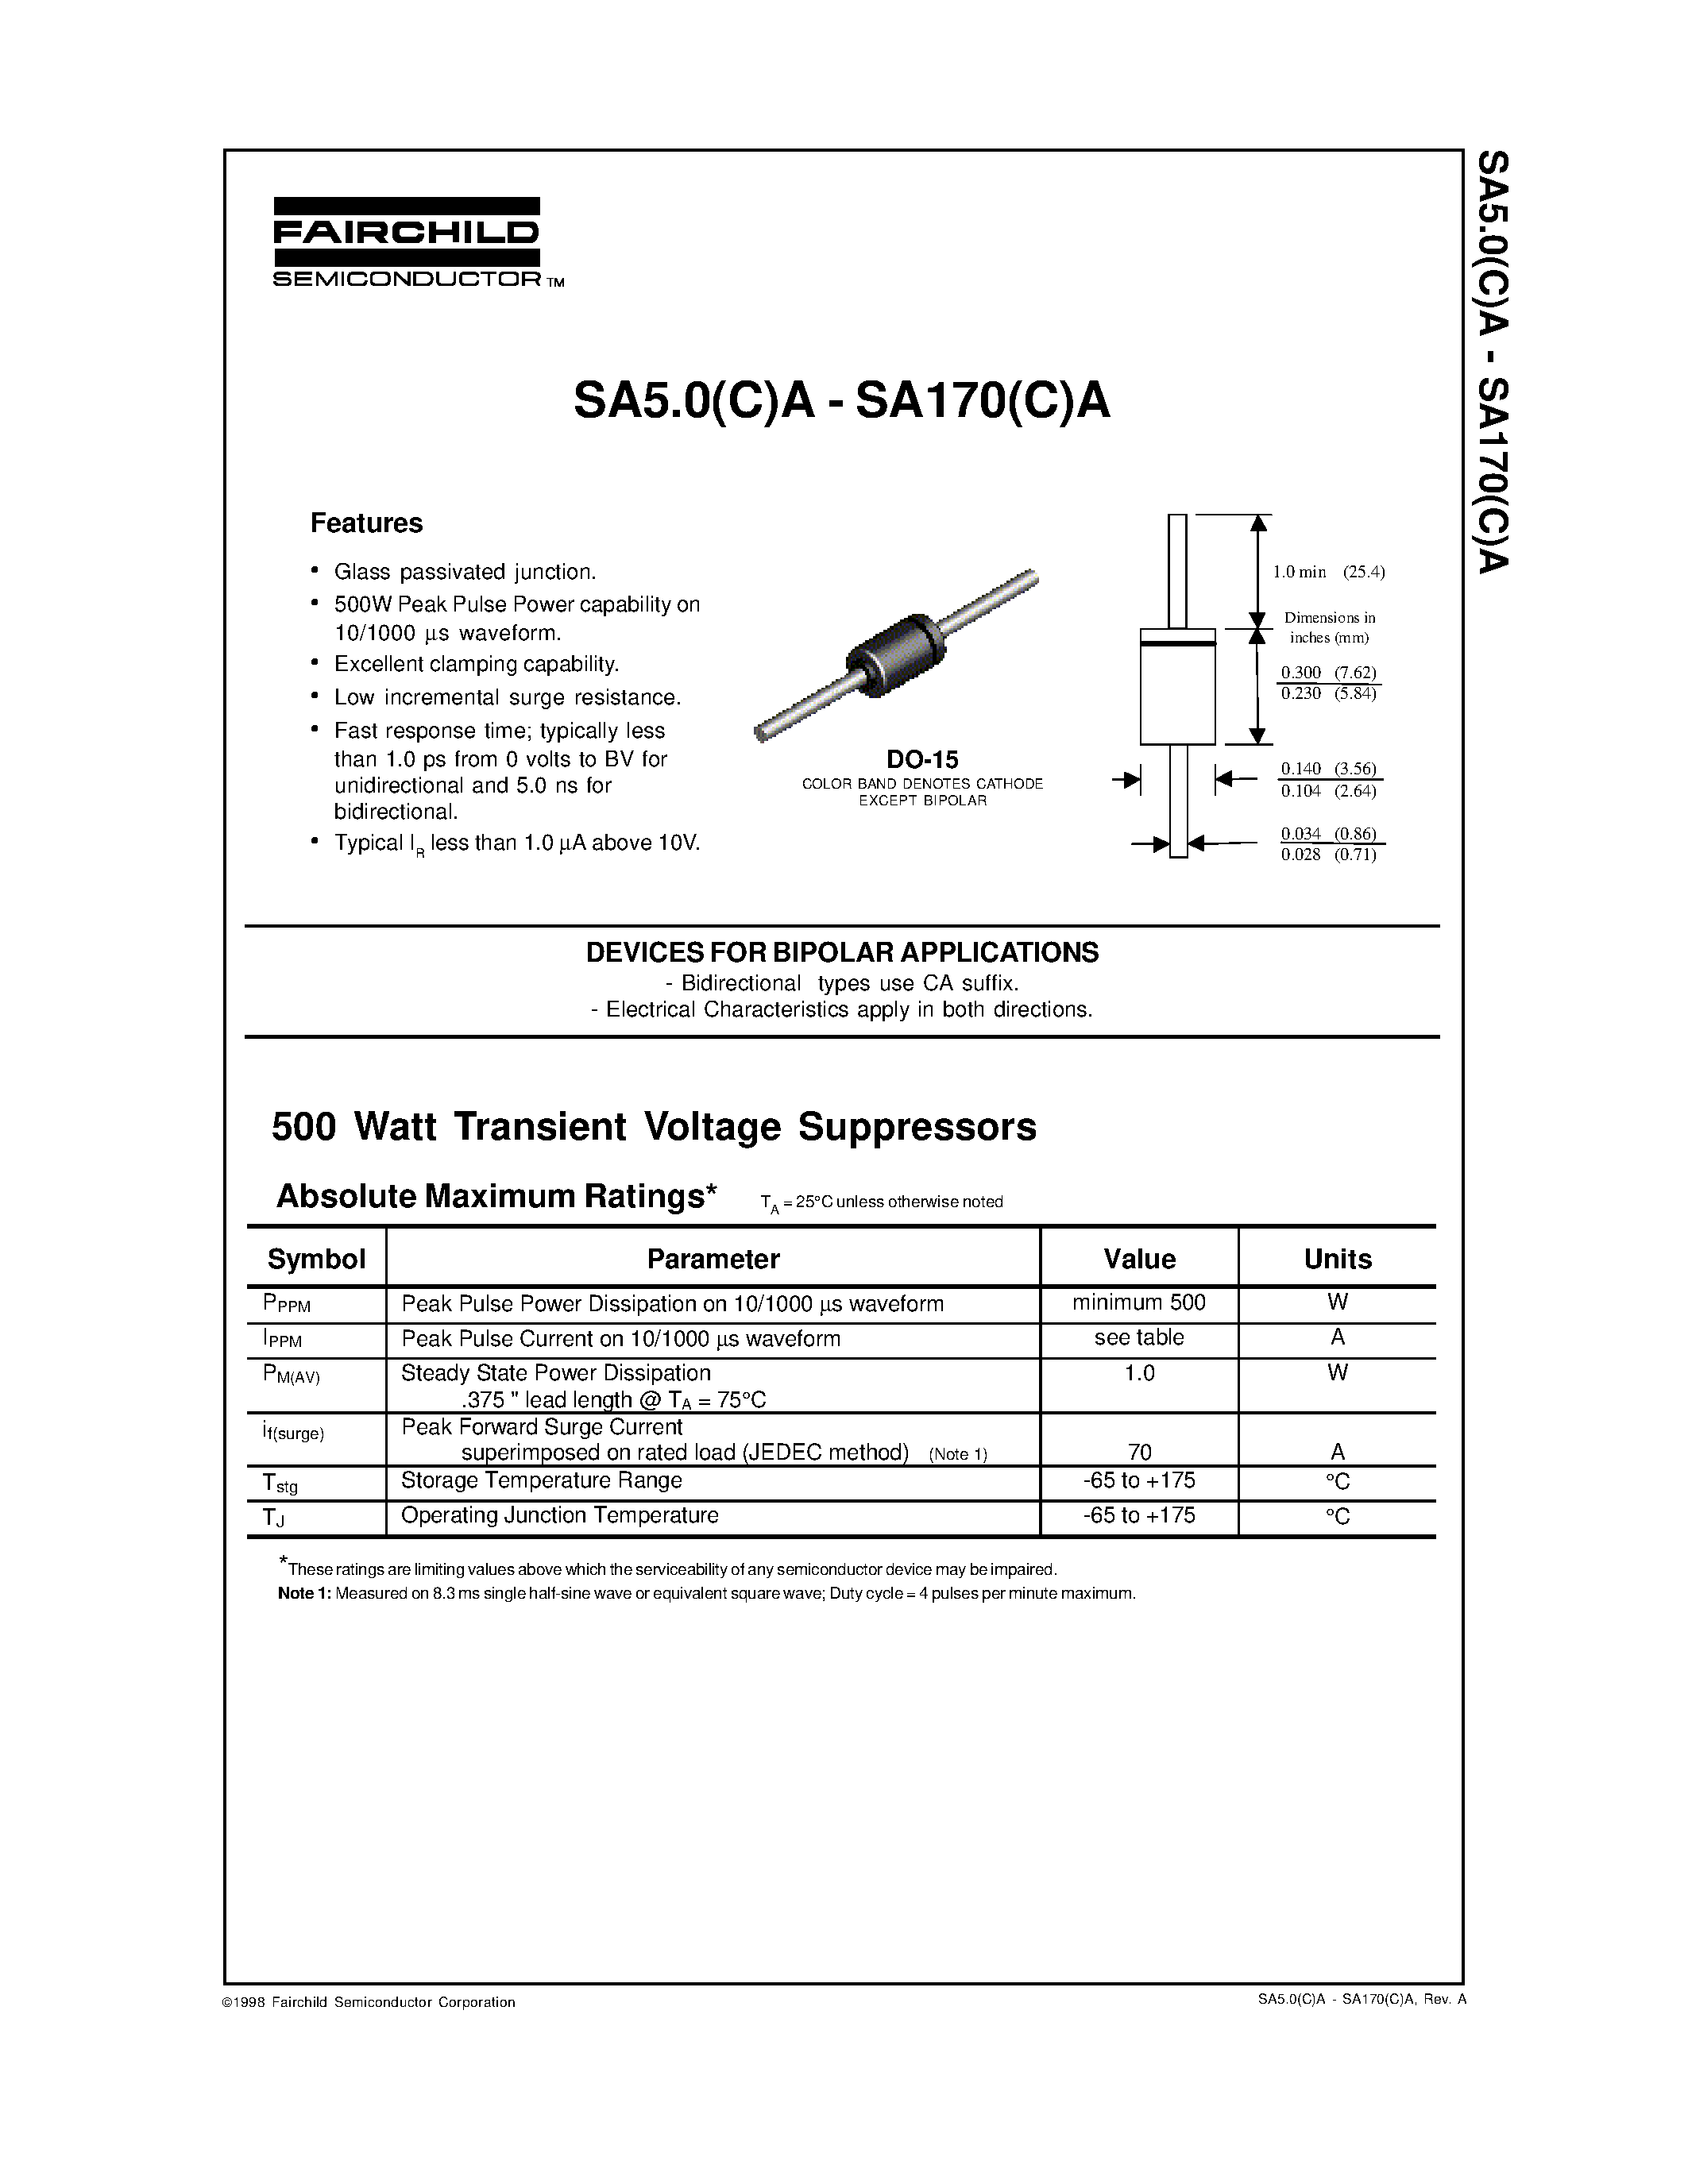 Datasheet SA26(C)A - DEVICES FOR BIPOLAR APPLICATIONS page 1